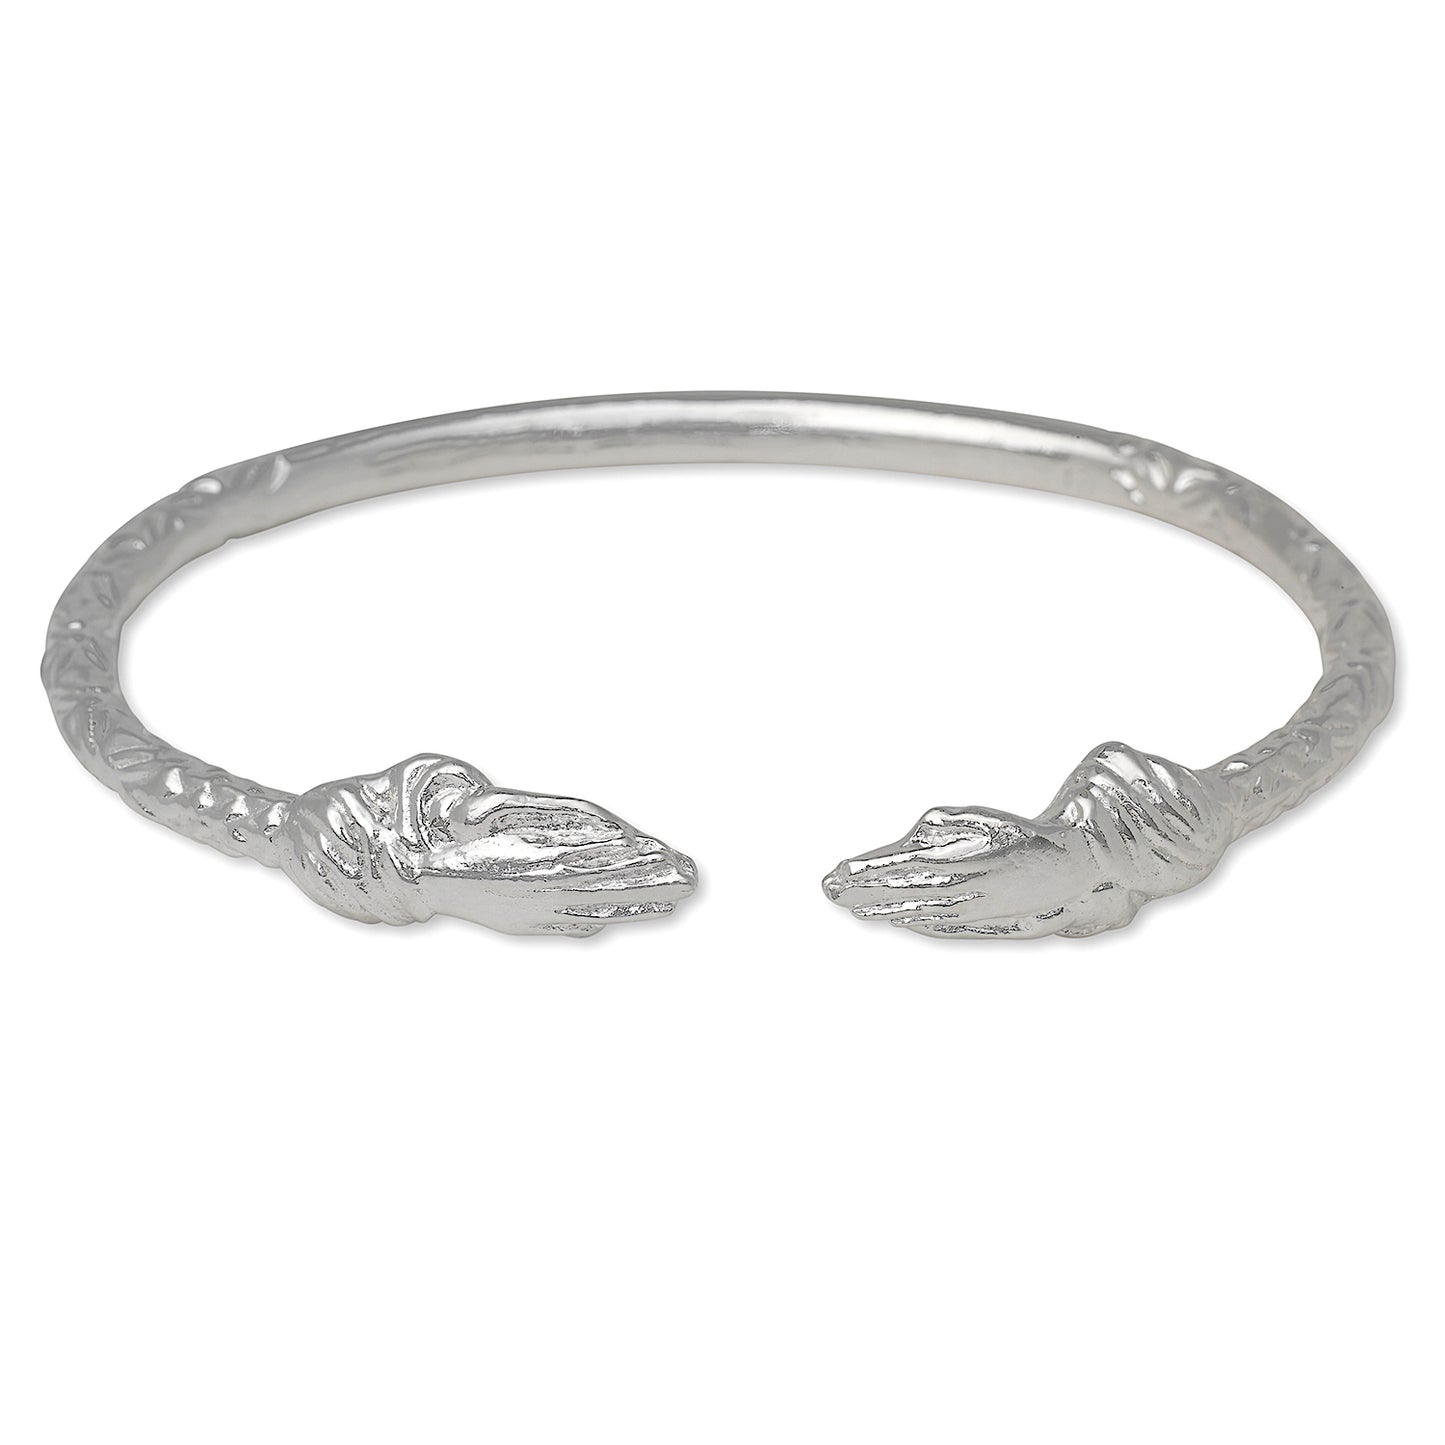 Better Jewelry Praying Hands Ends West Indian Bangle .925 Sterling Silver, 1 piece